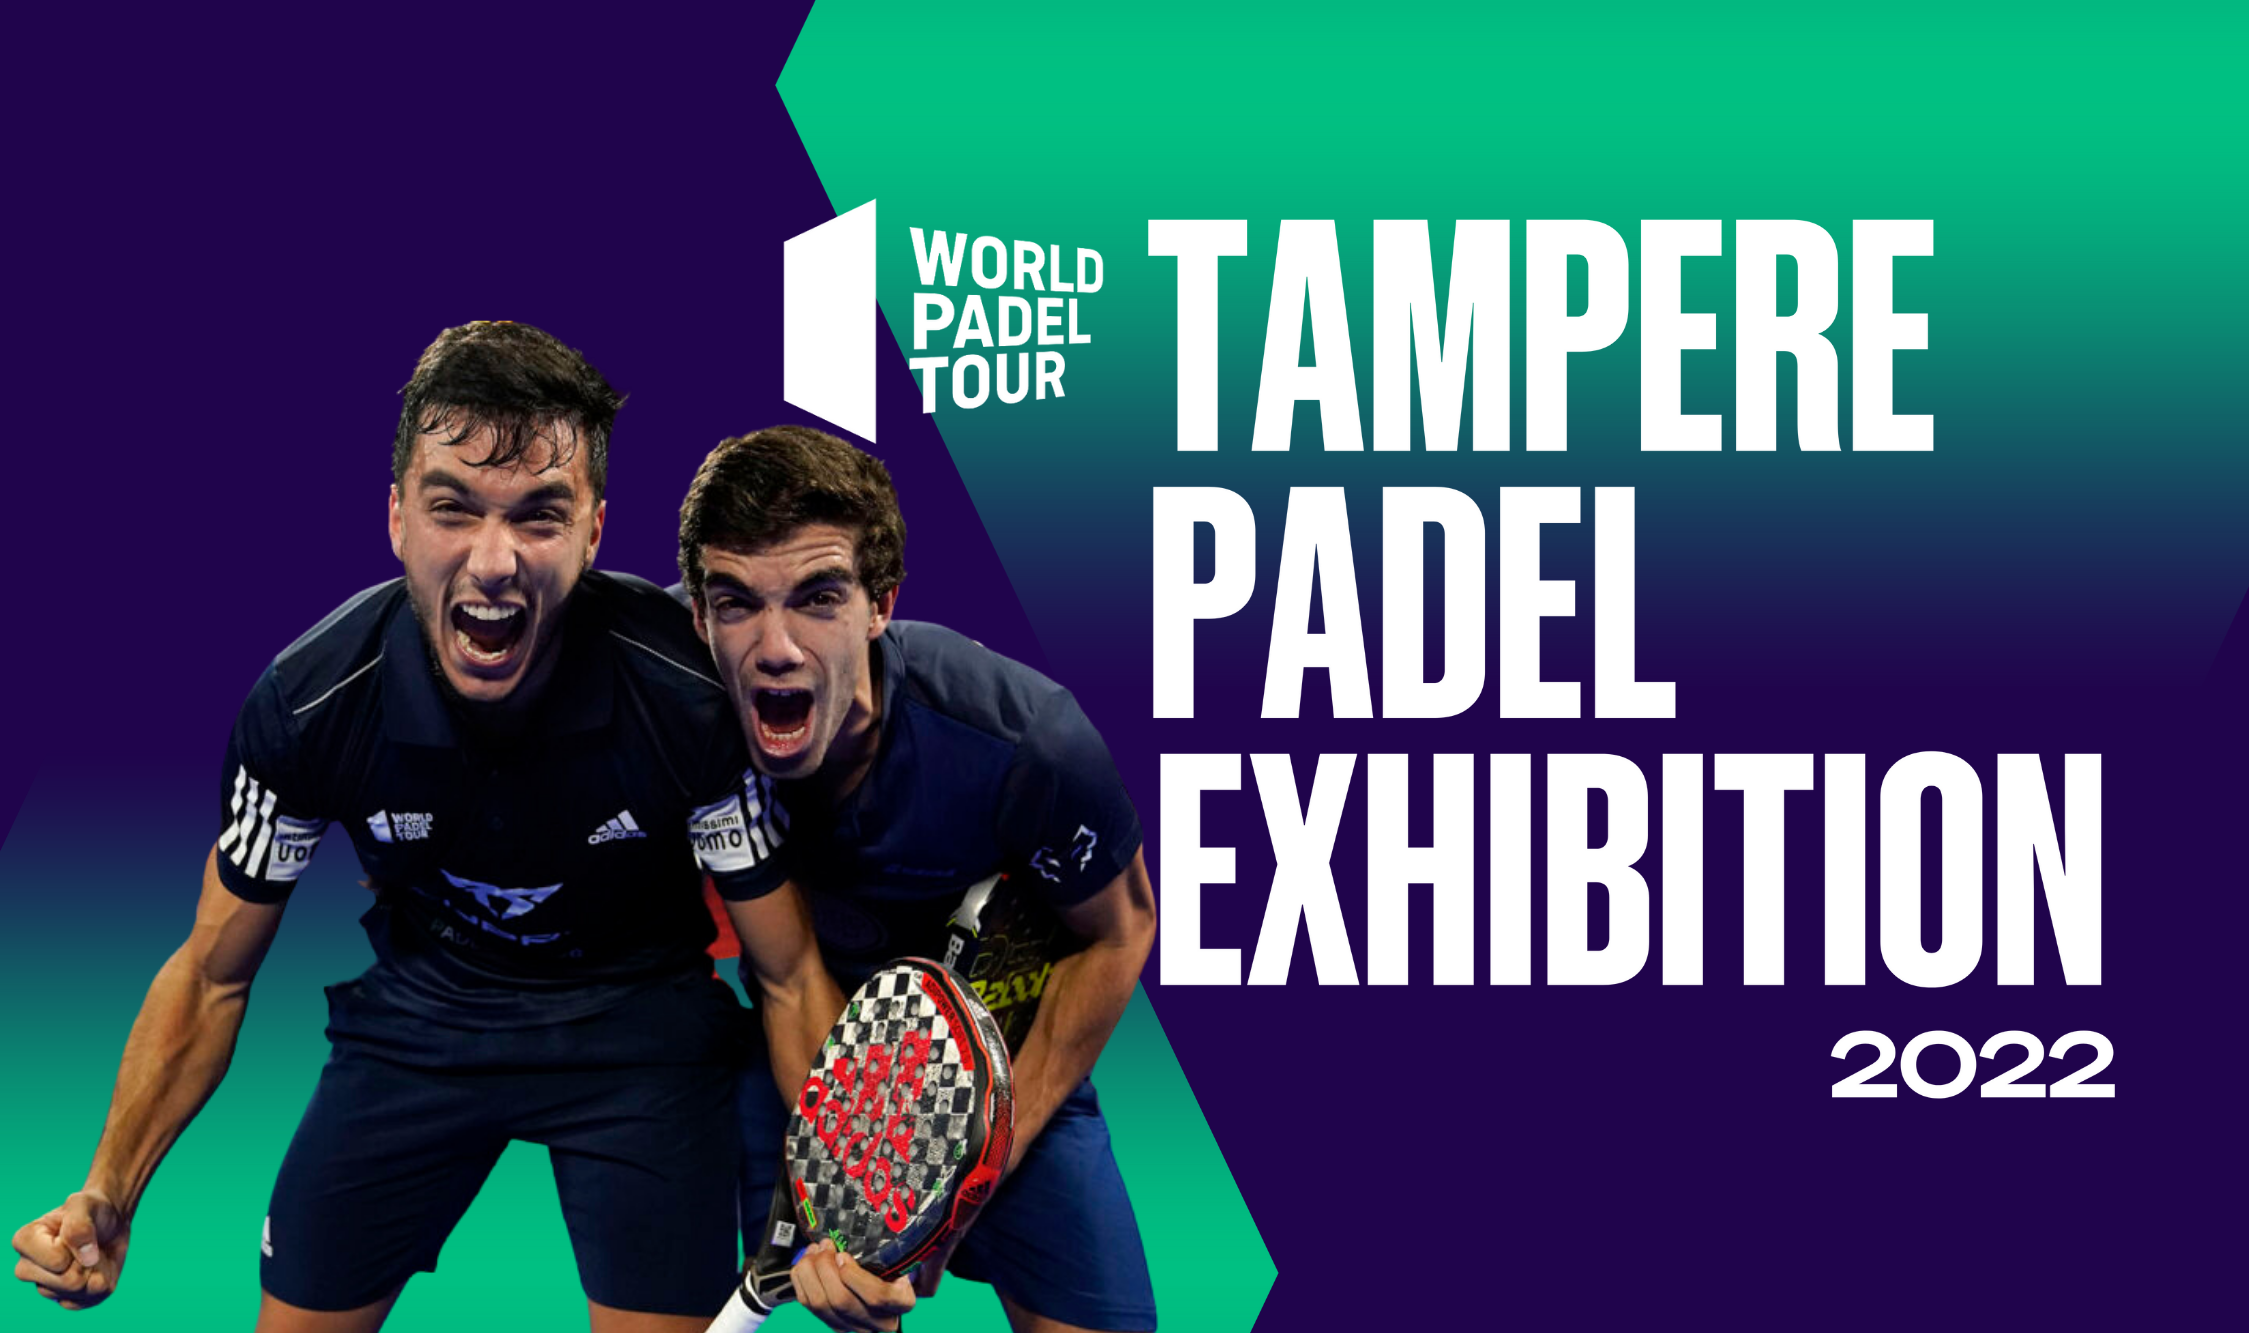 WPT - TAMPERE PADEL EXHIBITION - FRIDAY